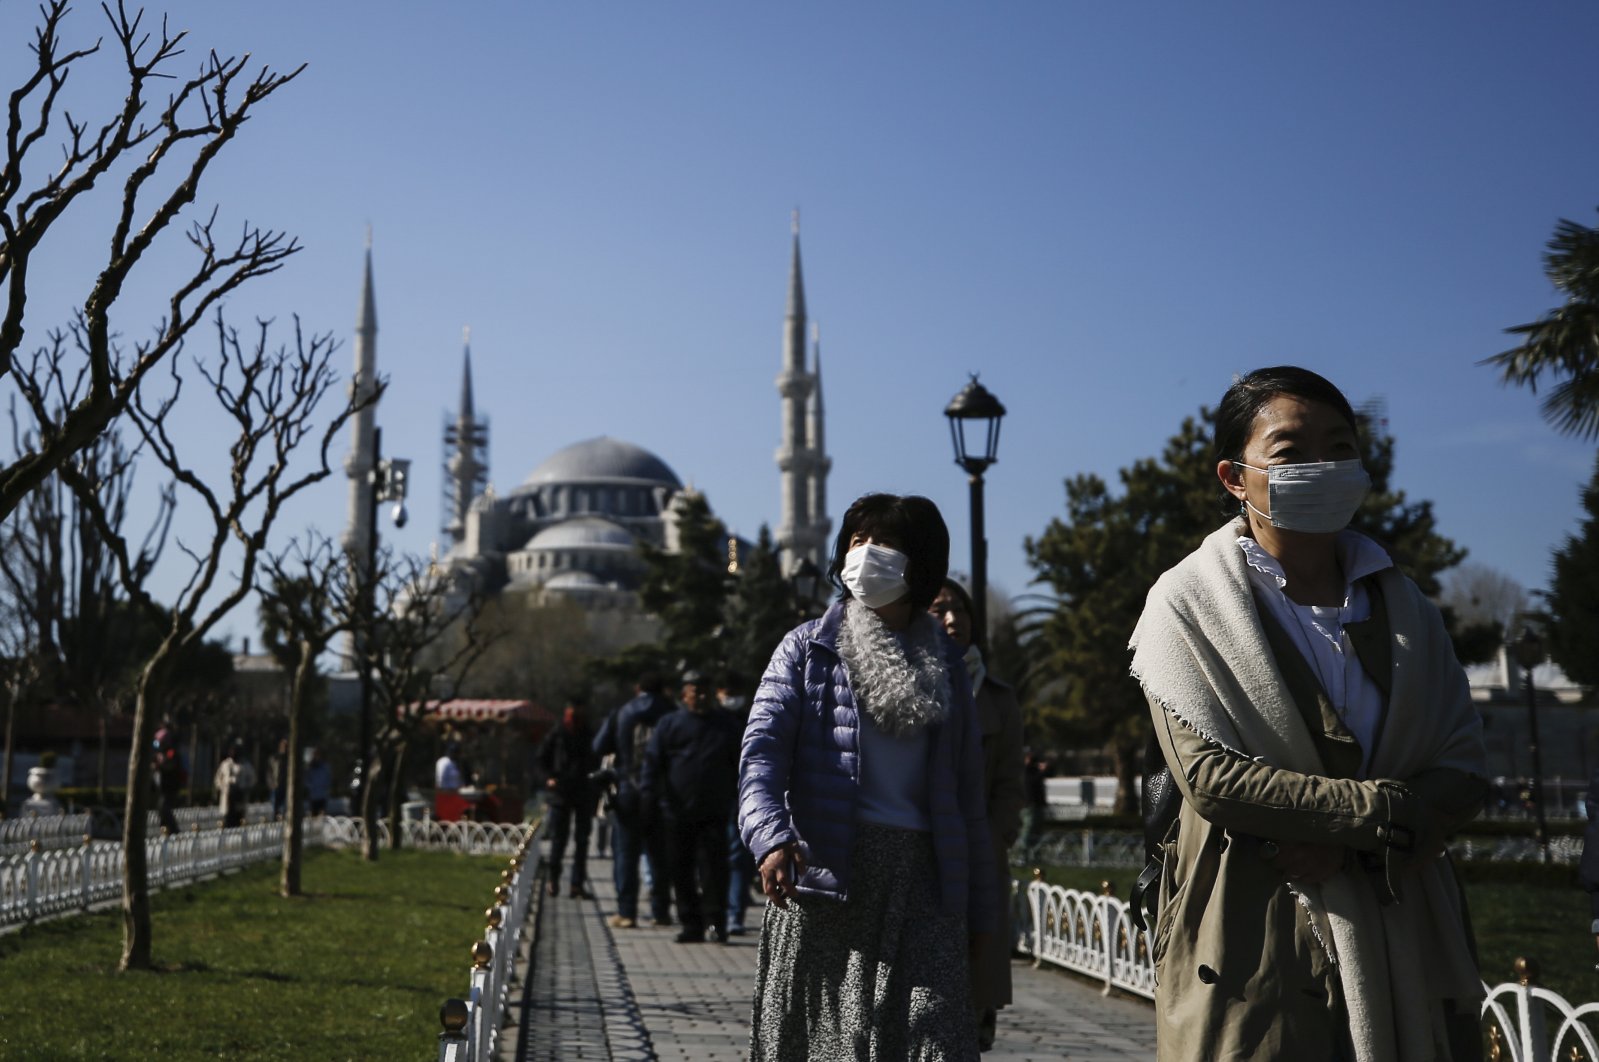 Tourists walk as municipality workers wearing face masks and protective suits disinfect the area surrounding the historical Blue Mosque, amid the coronavirus outbreak, in Istanbul, Turkey, March 21, 2020. (AP Photo)